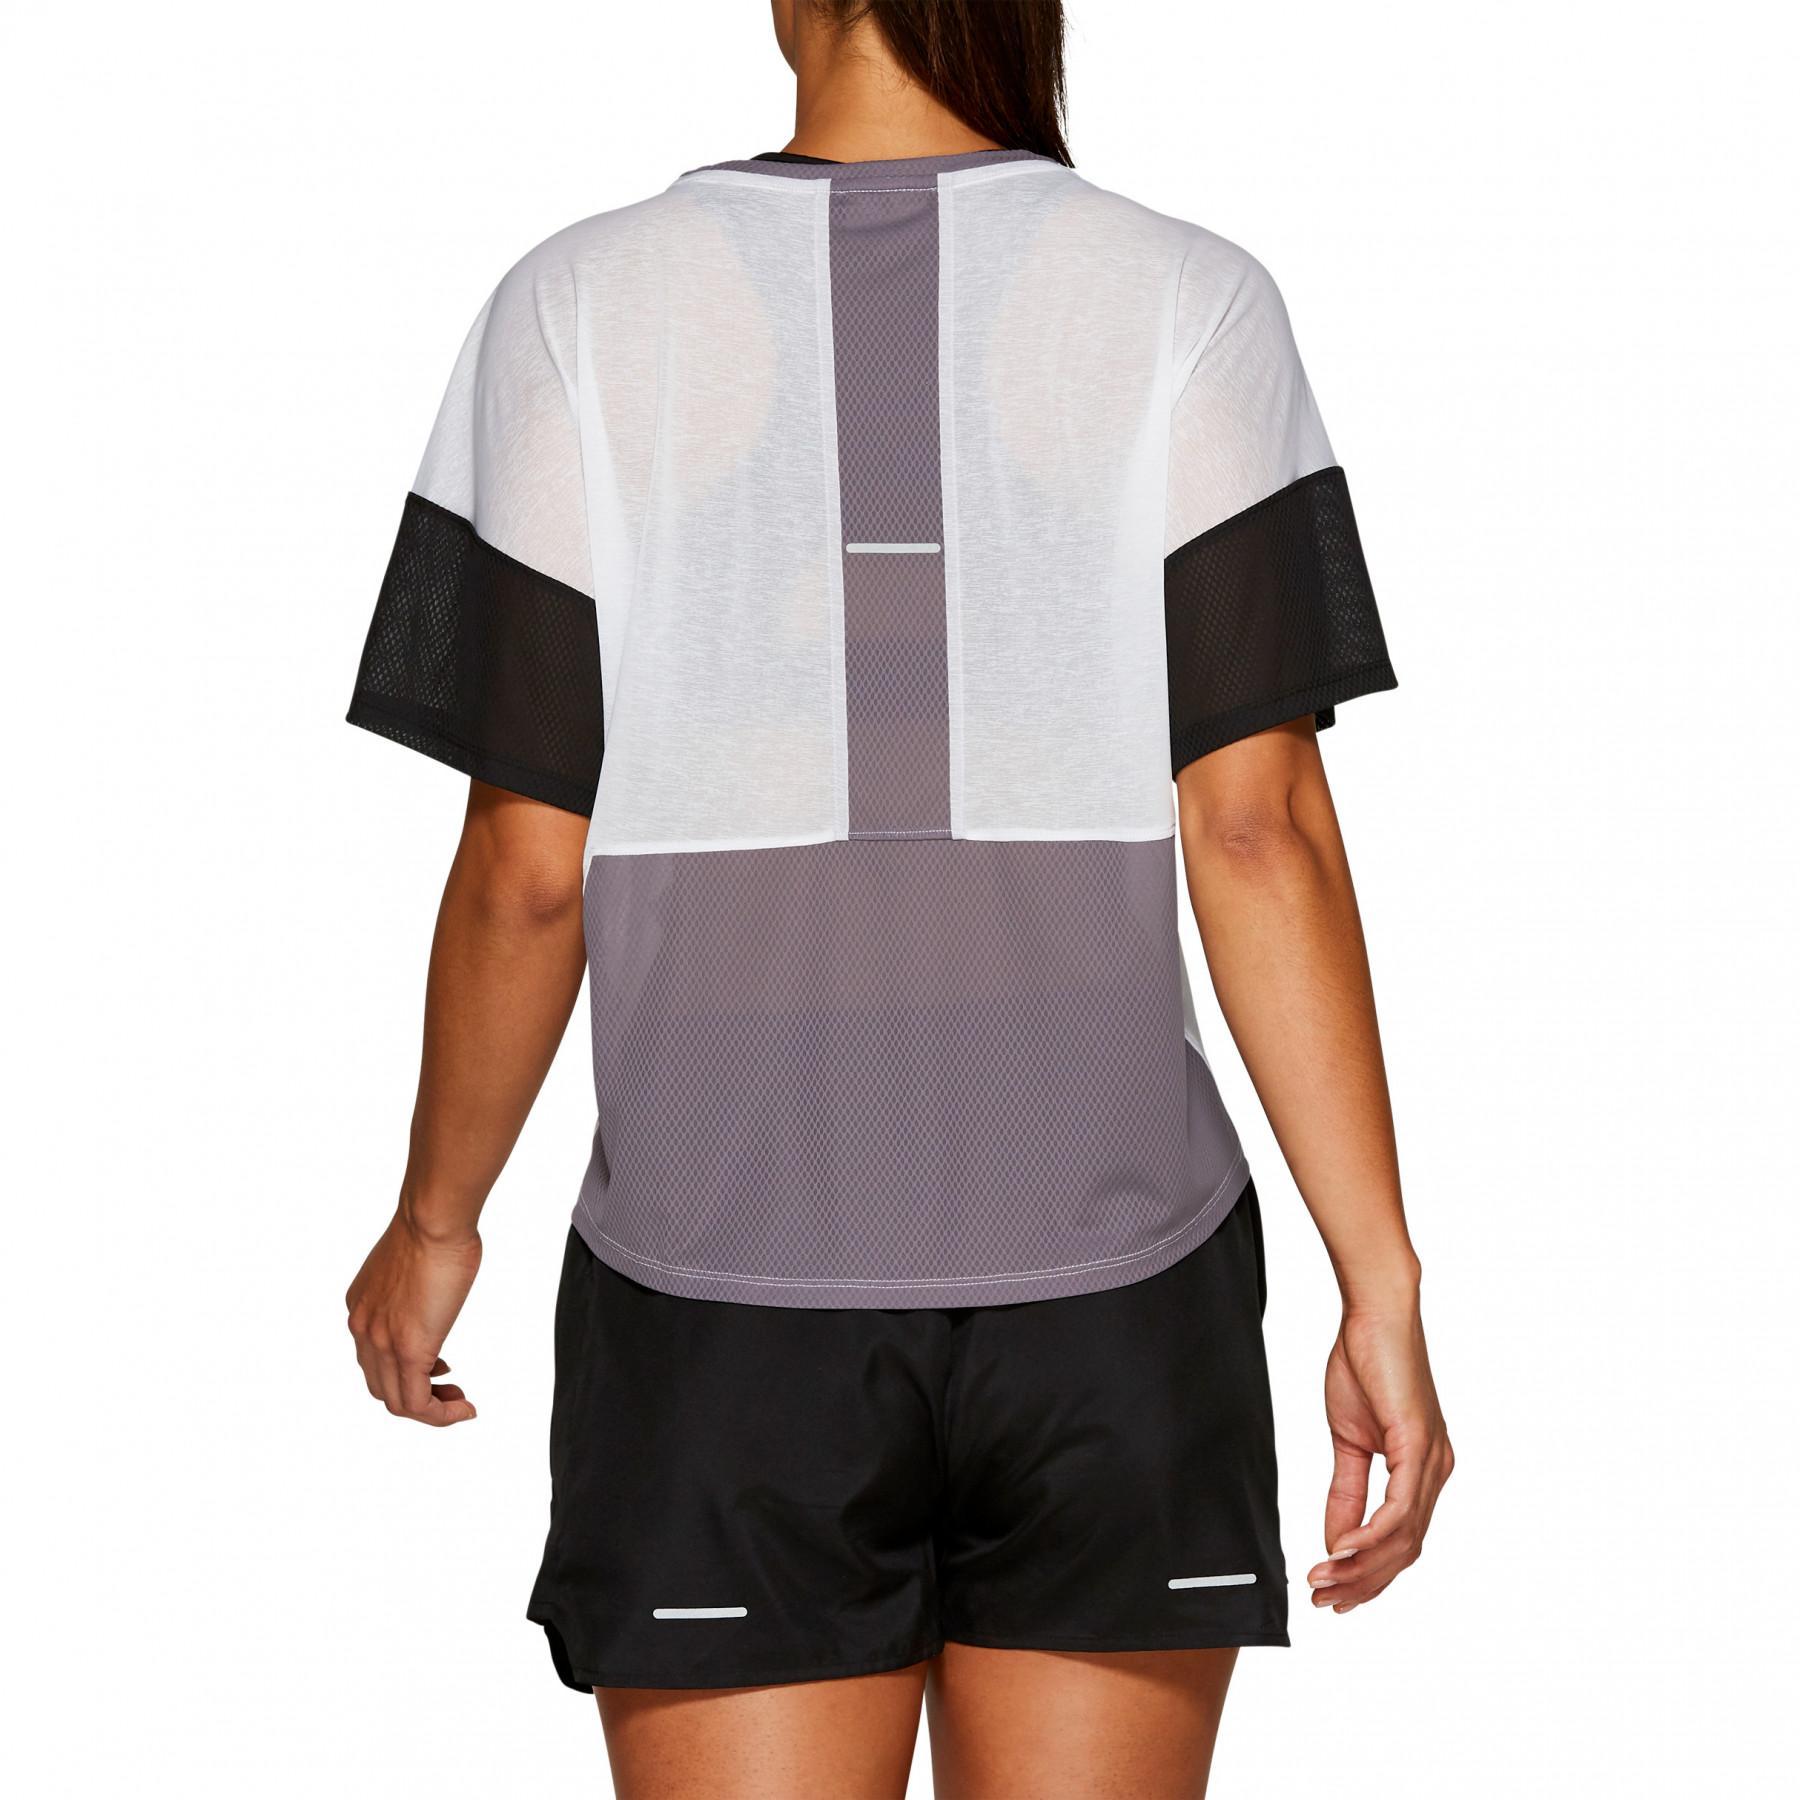 Maillot femme Asics Empow-Her Style